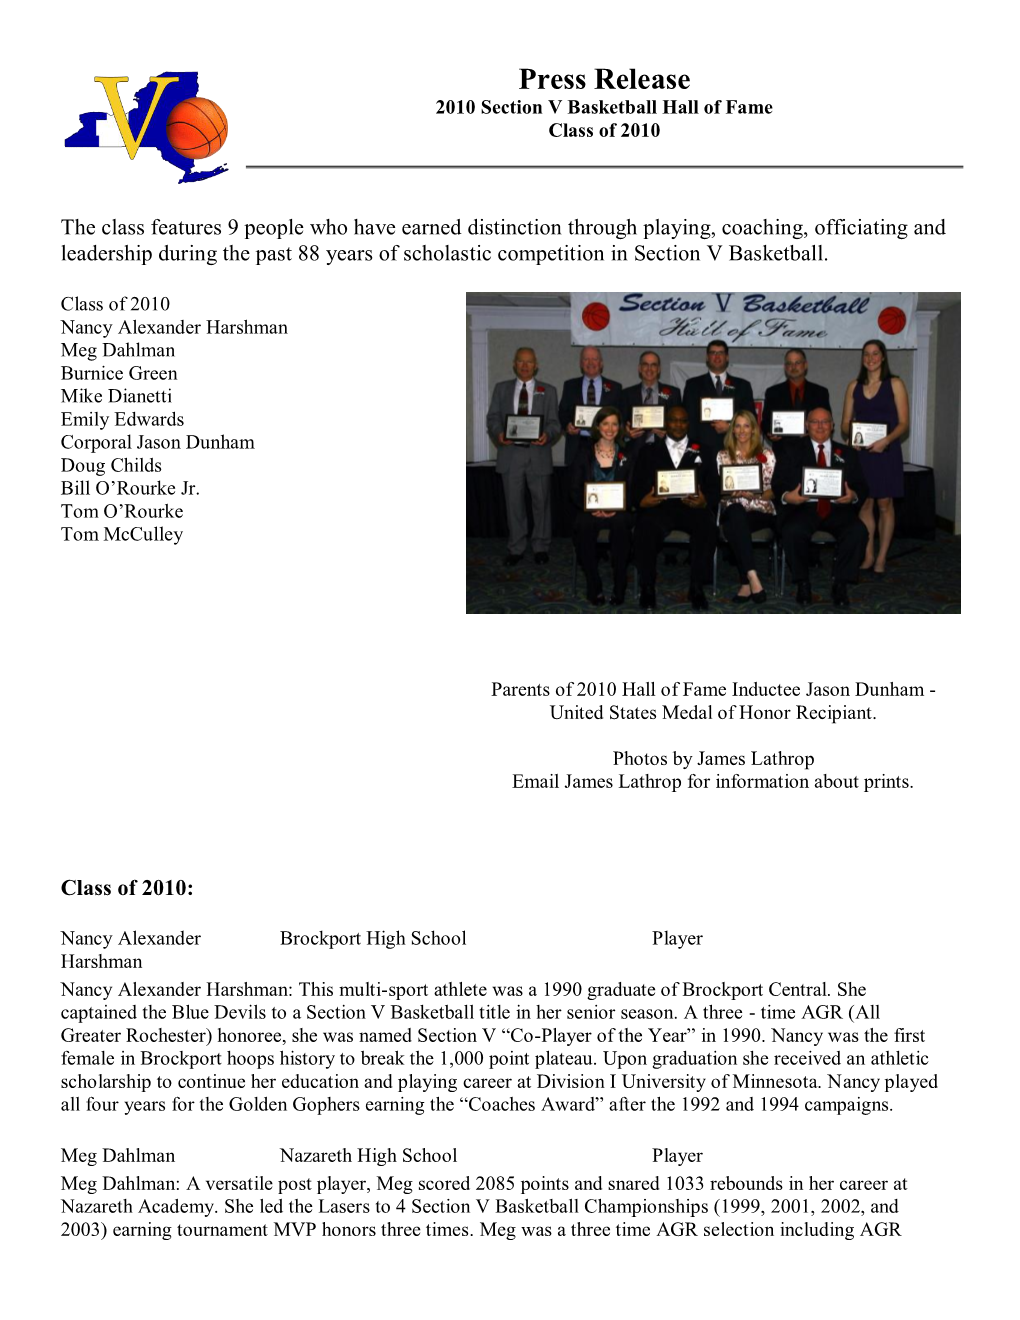 Press Release 2010 Section V Basketball Hall of Fame Class of 2010